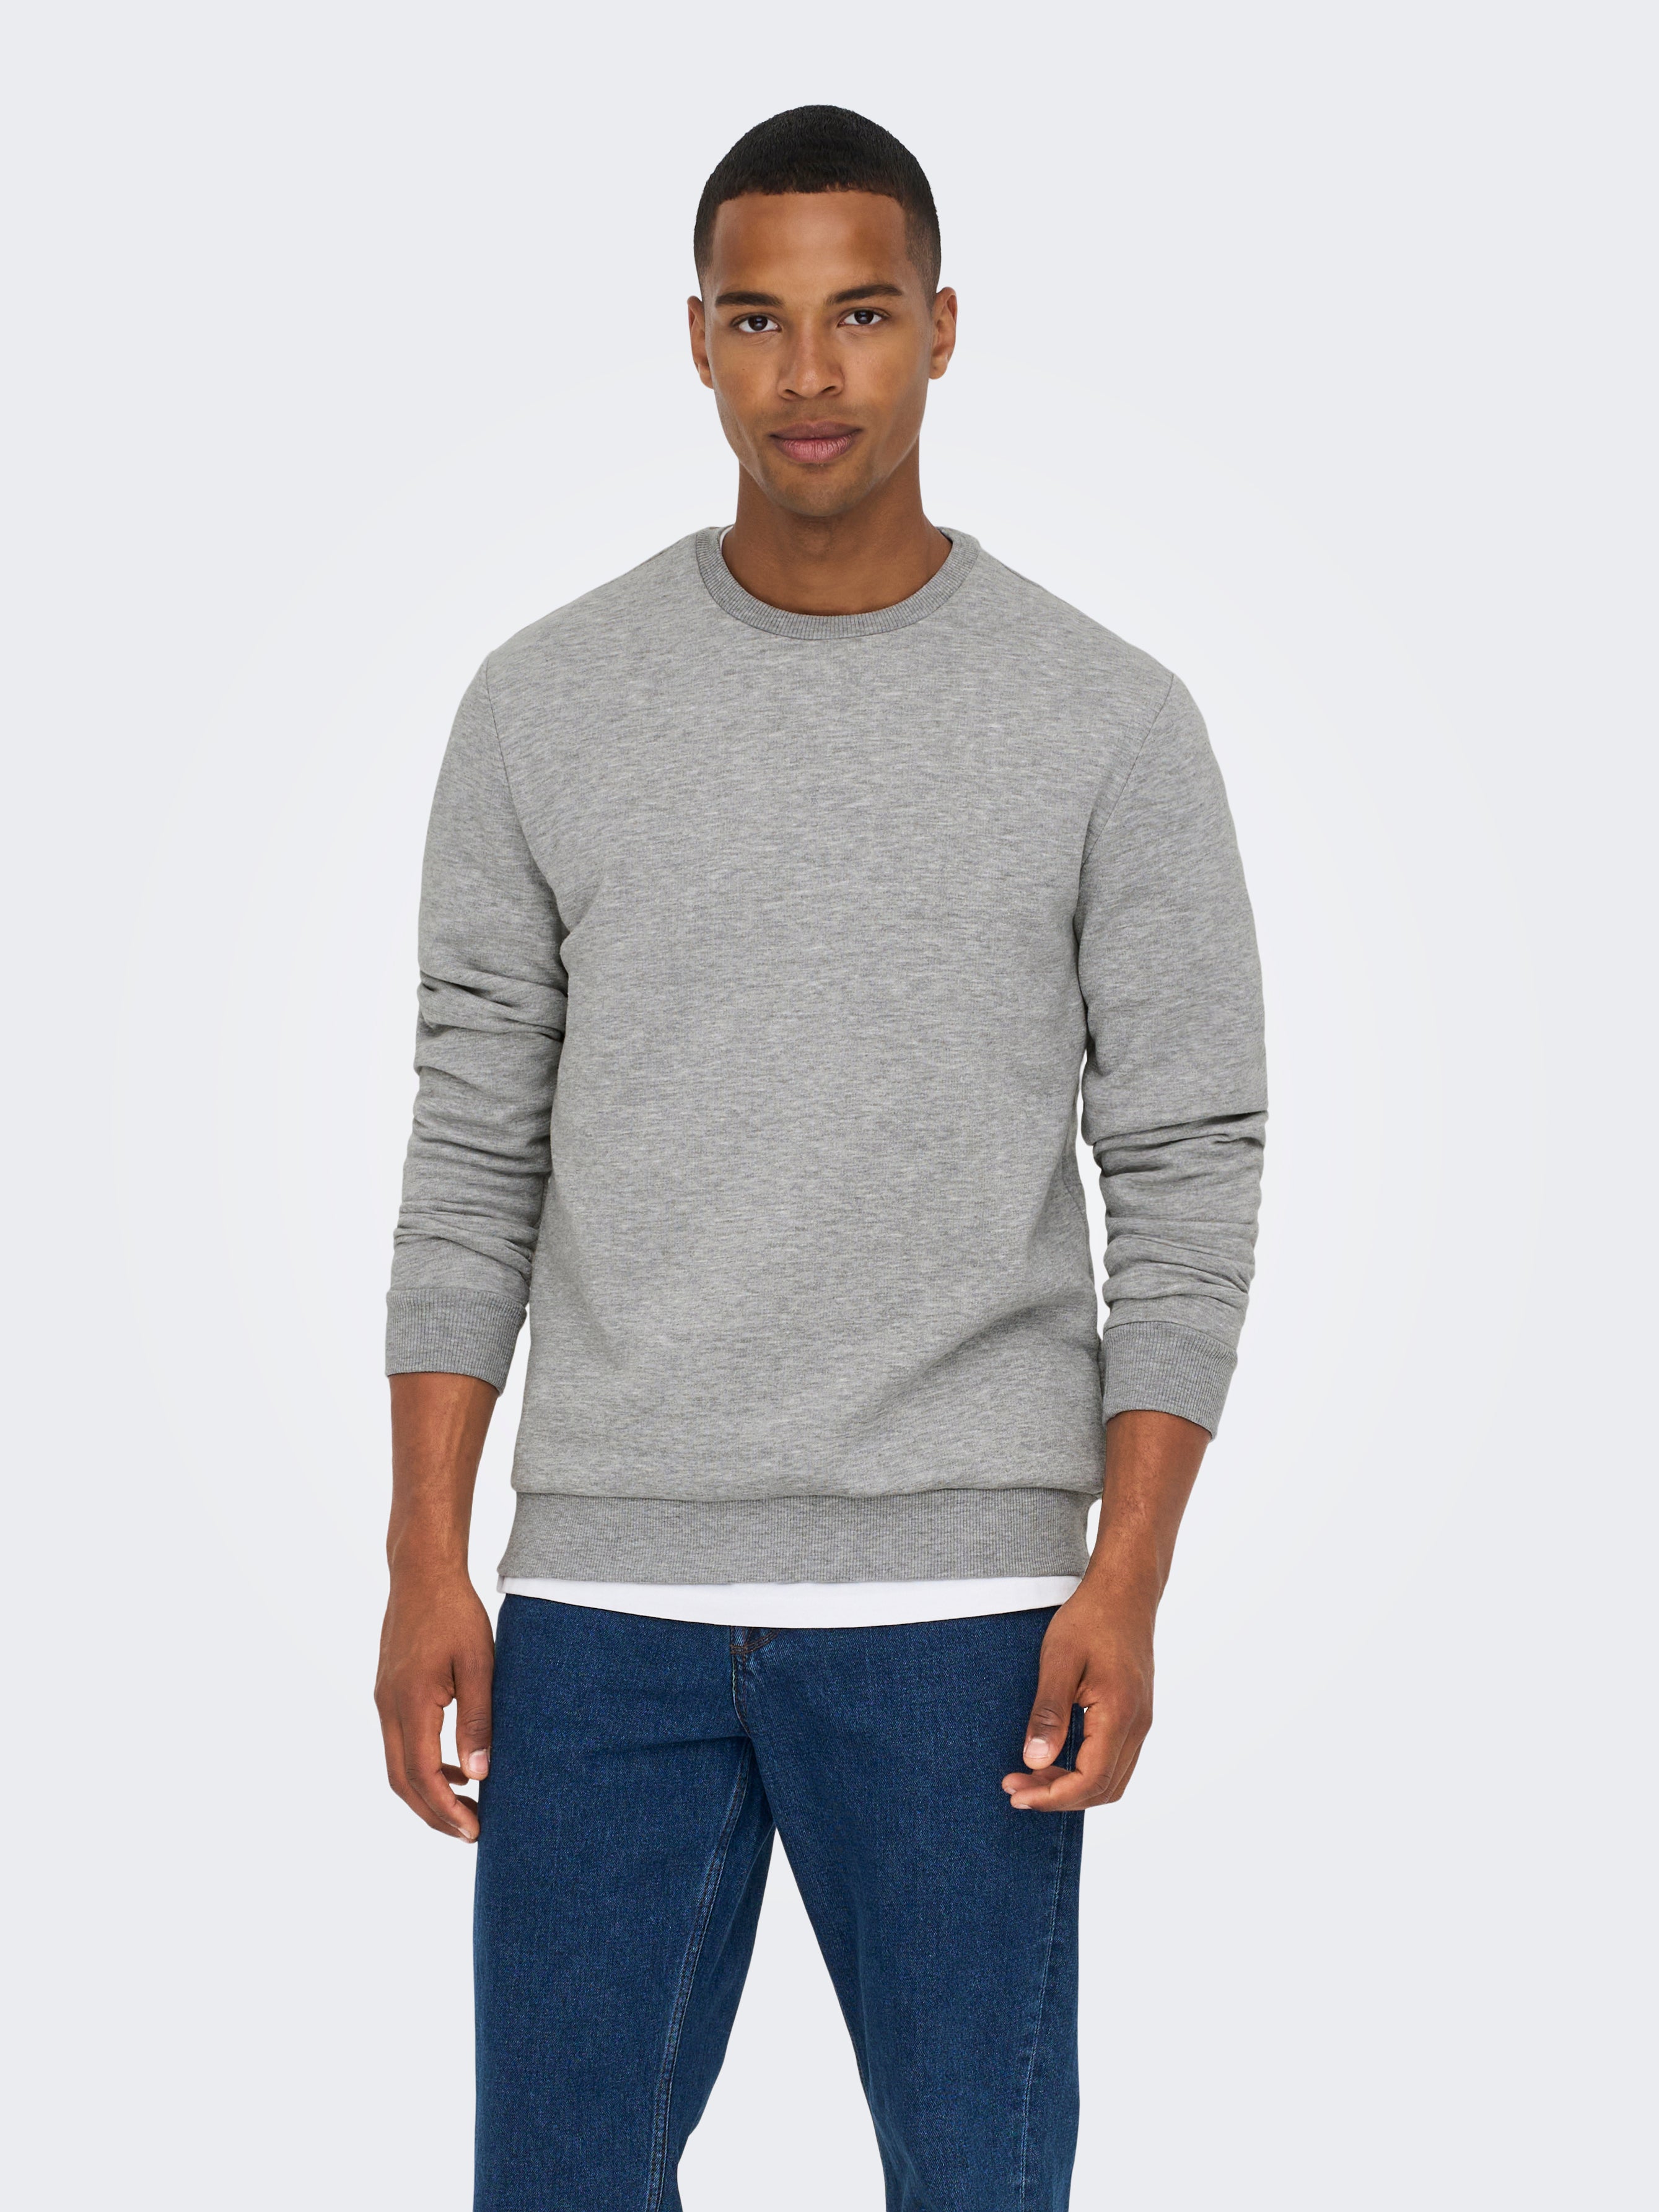 Sweatshirts for Men: Red, Blue & More | ONLY & SONS